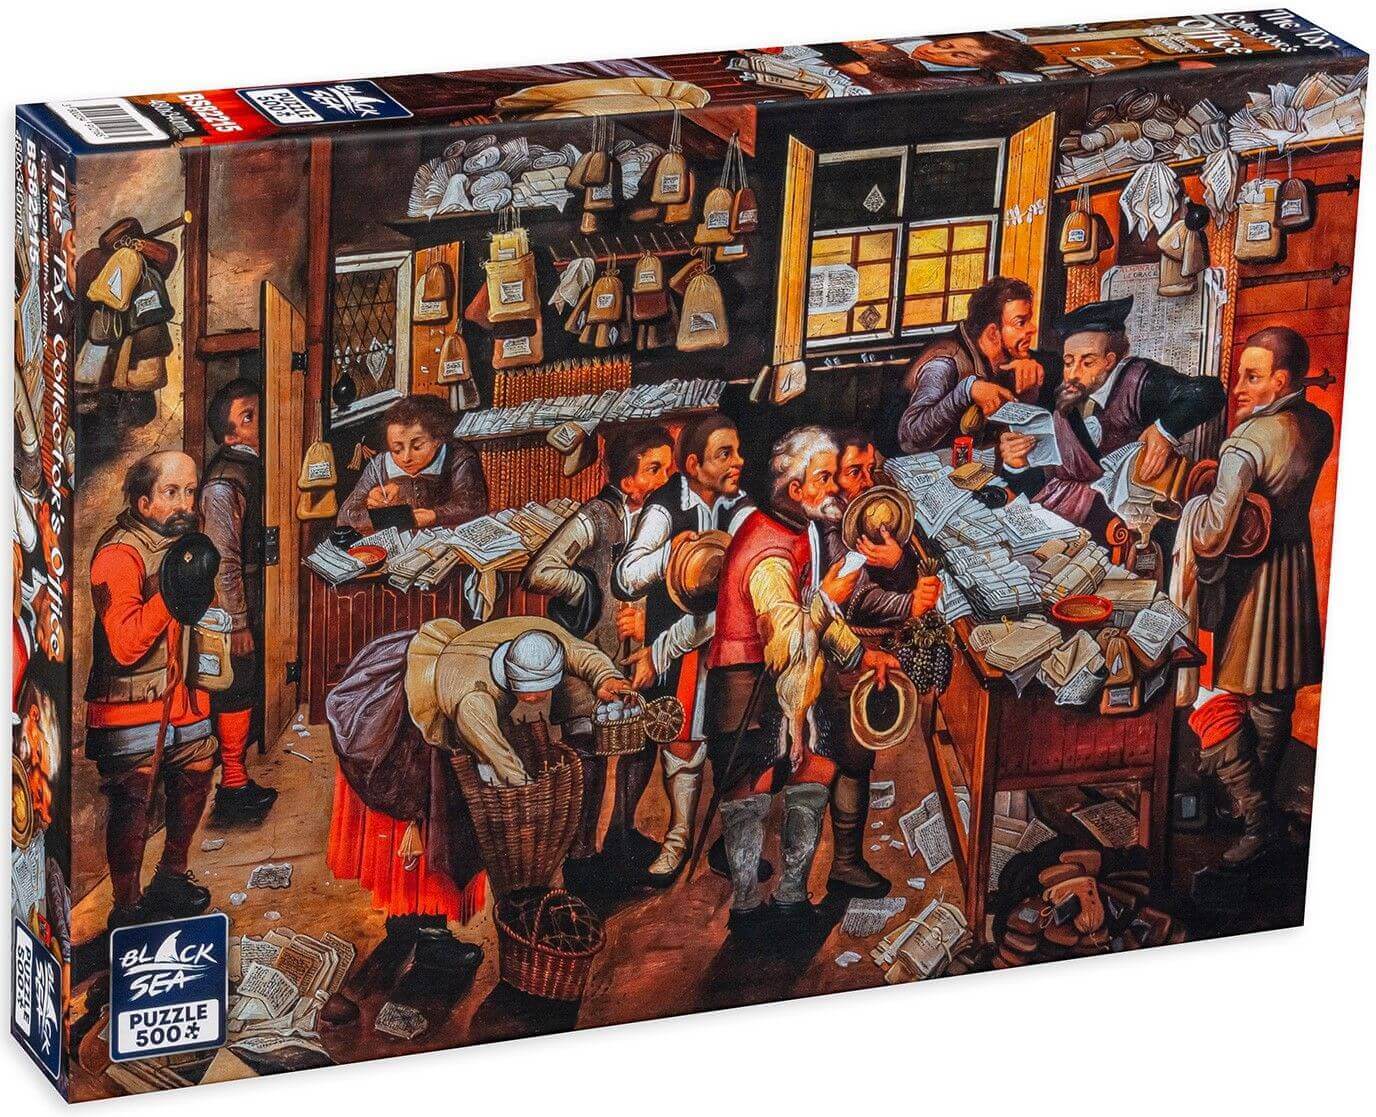 Puzzle Black Sea 500 pieces - The Tax Collector's Office